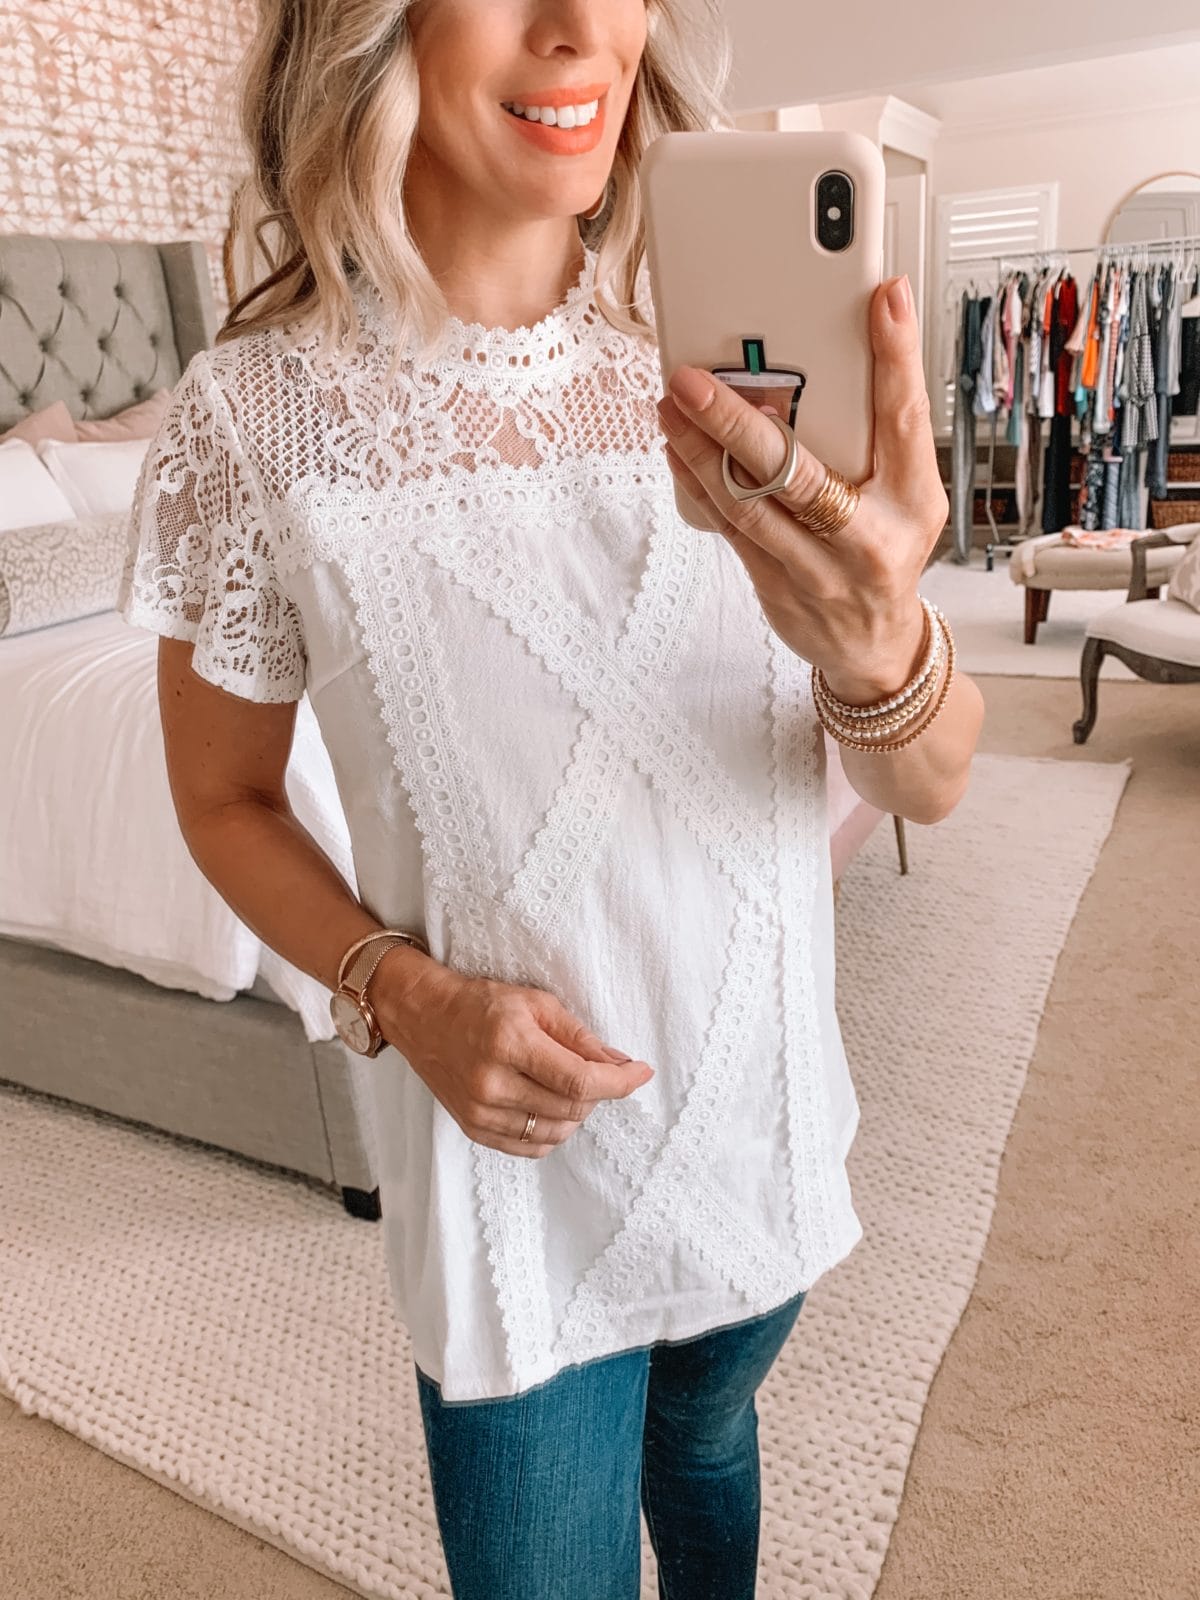 Amazon Fashion Finds, Lace Top, Skinny Jeans